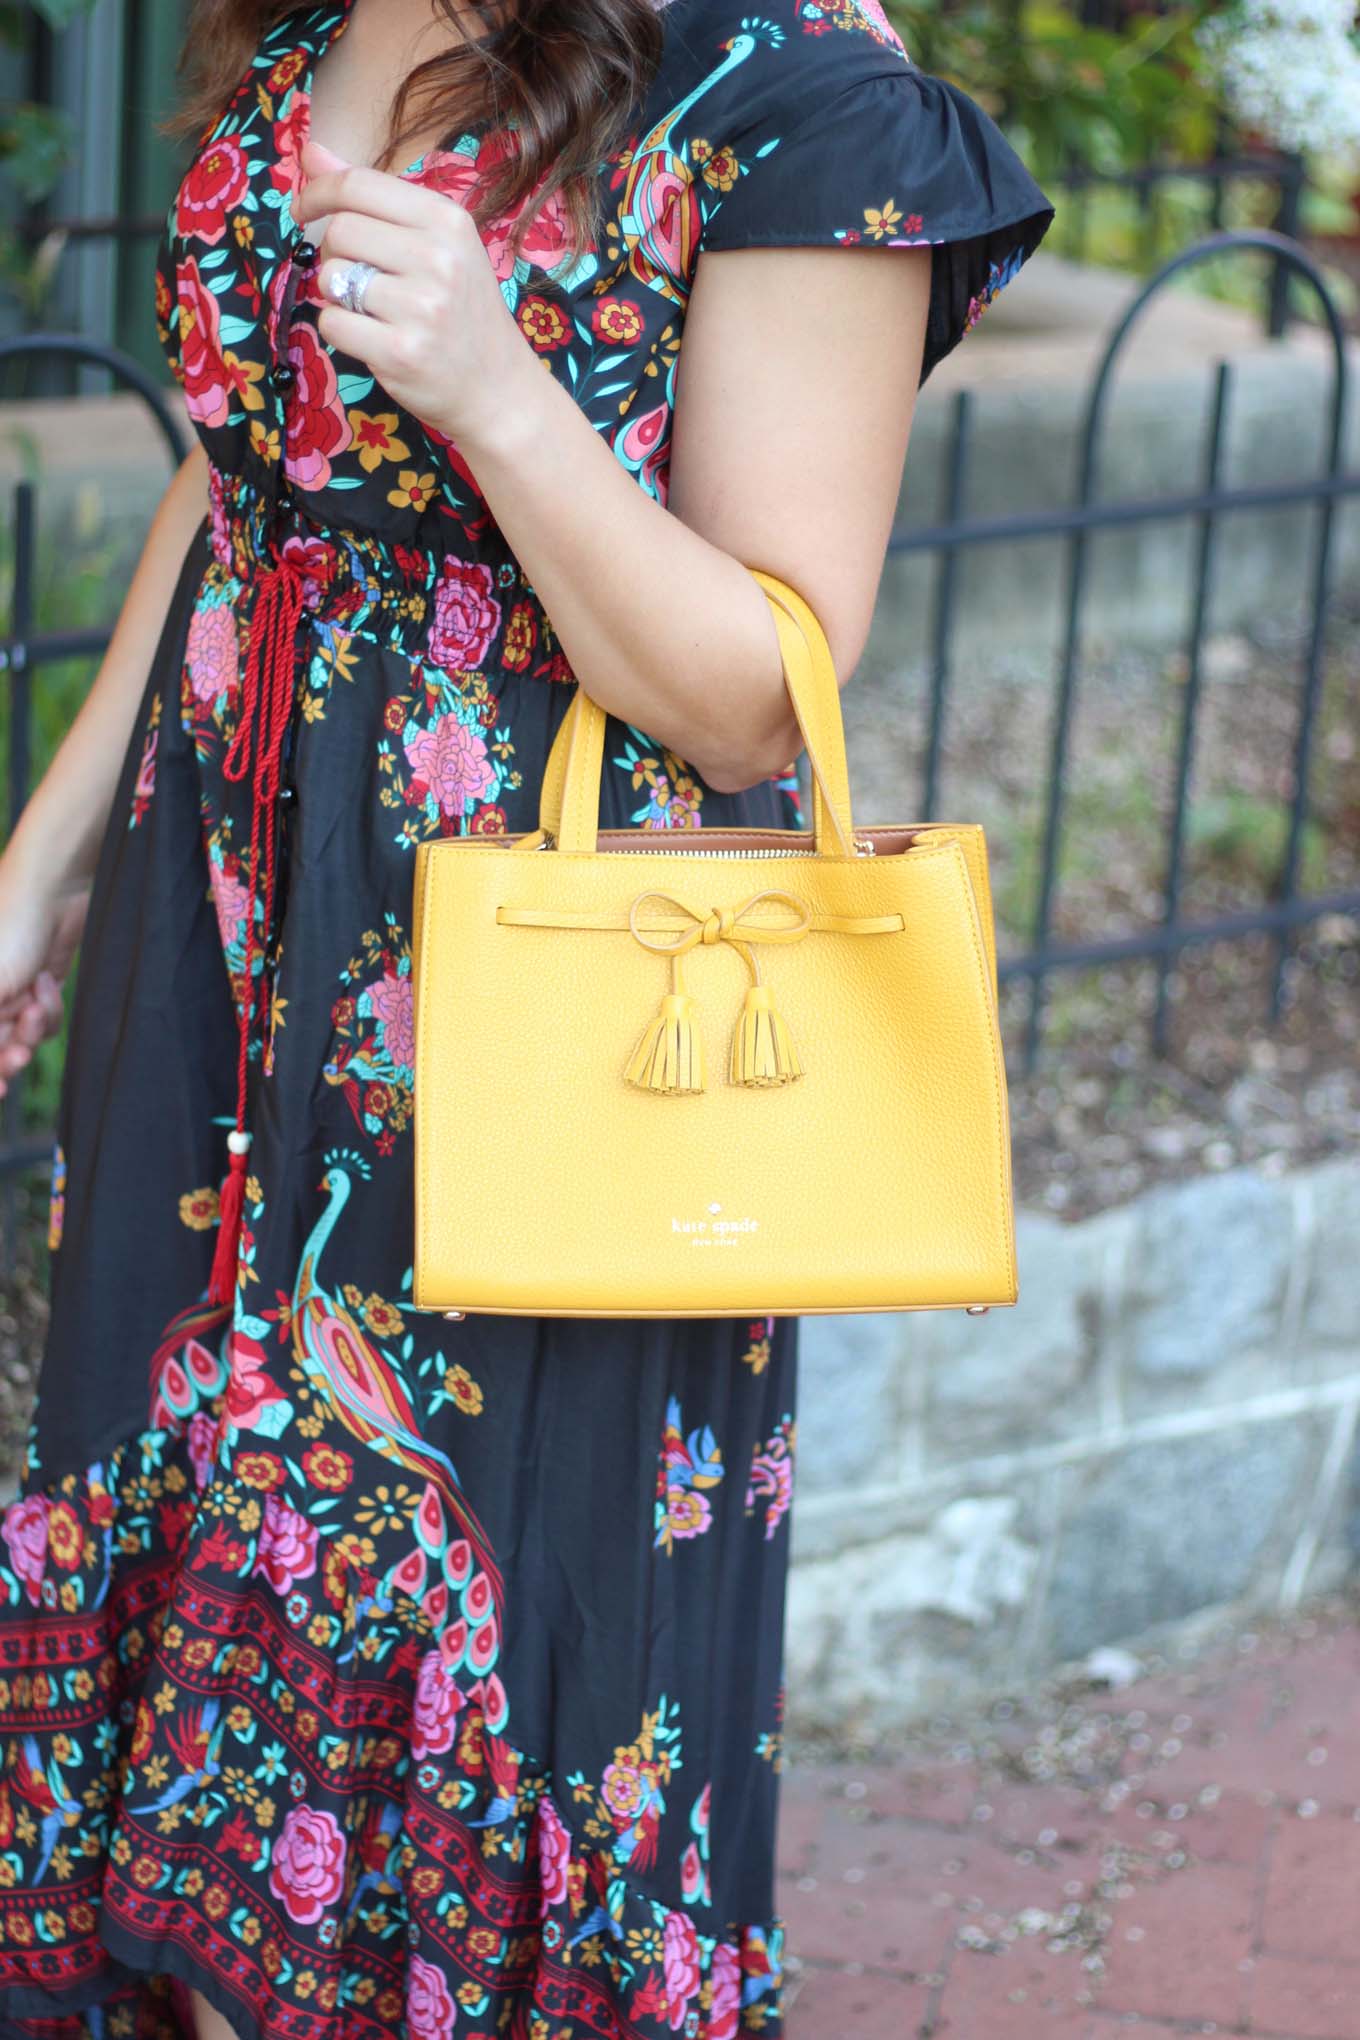 Lifestyle blogger Roxanne of Glass of Glam wearing a navy blue floral high low dress, Kate Spade bag, and Baublebar Earrings